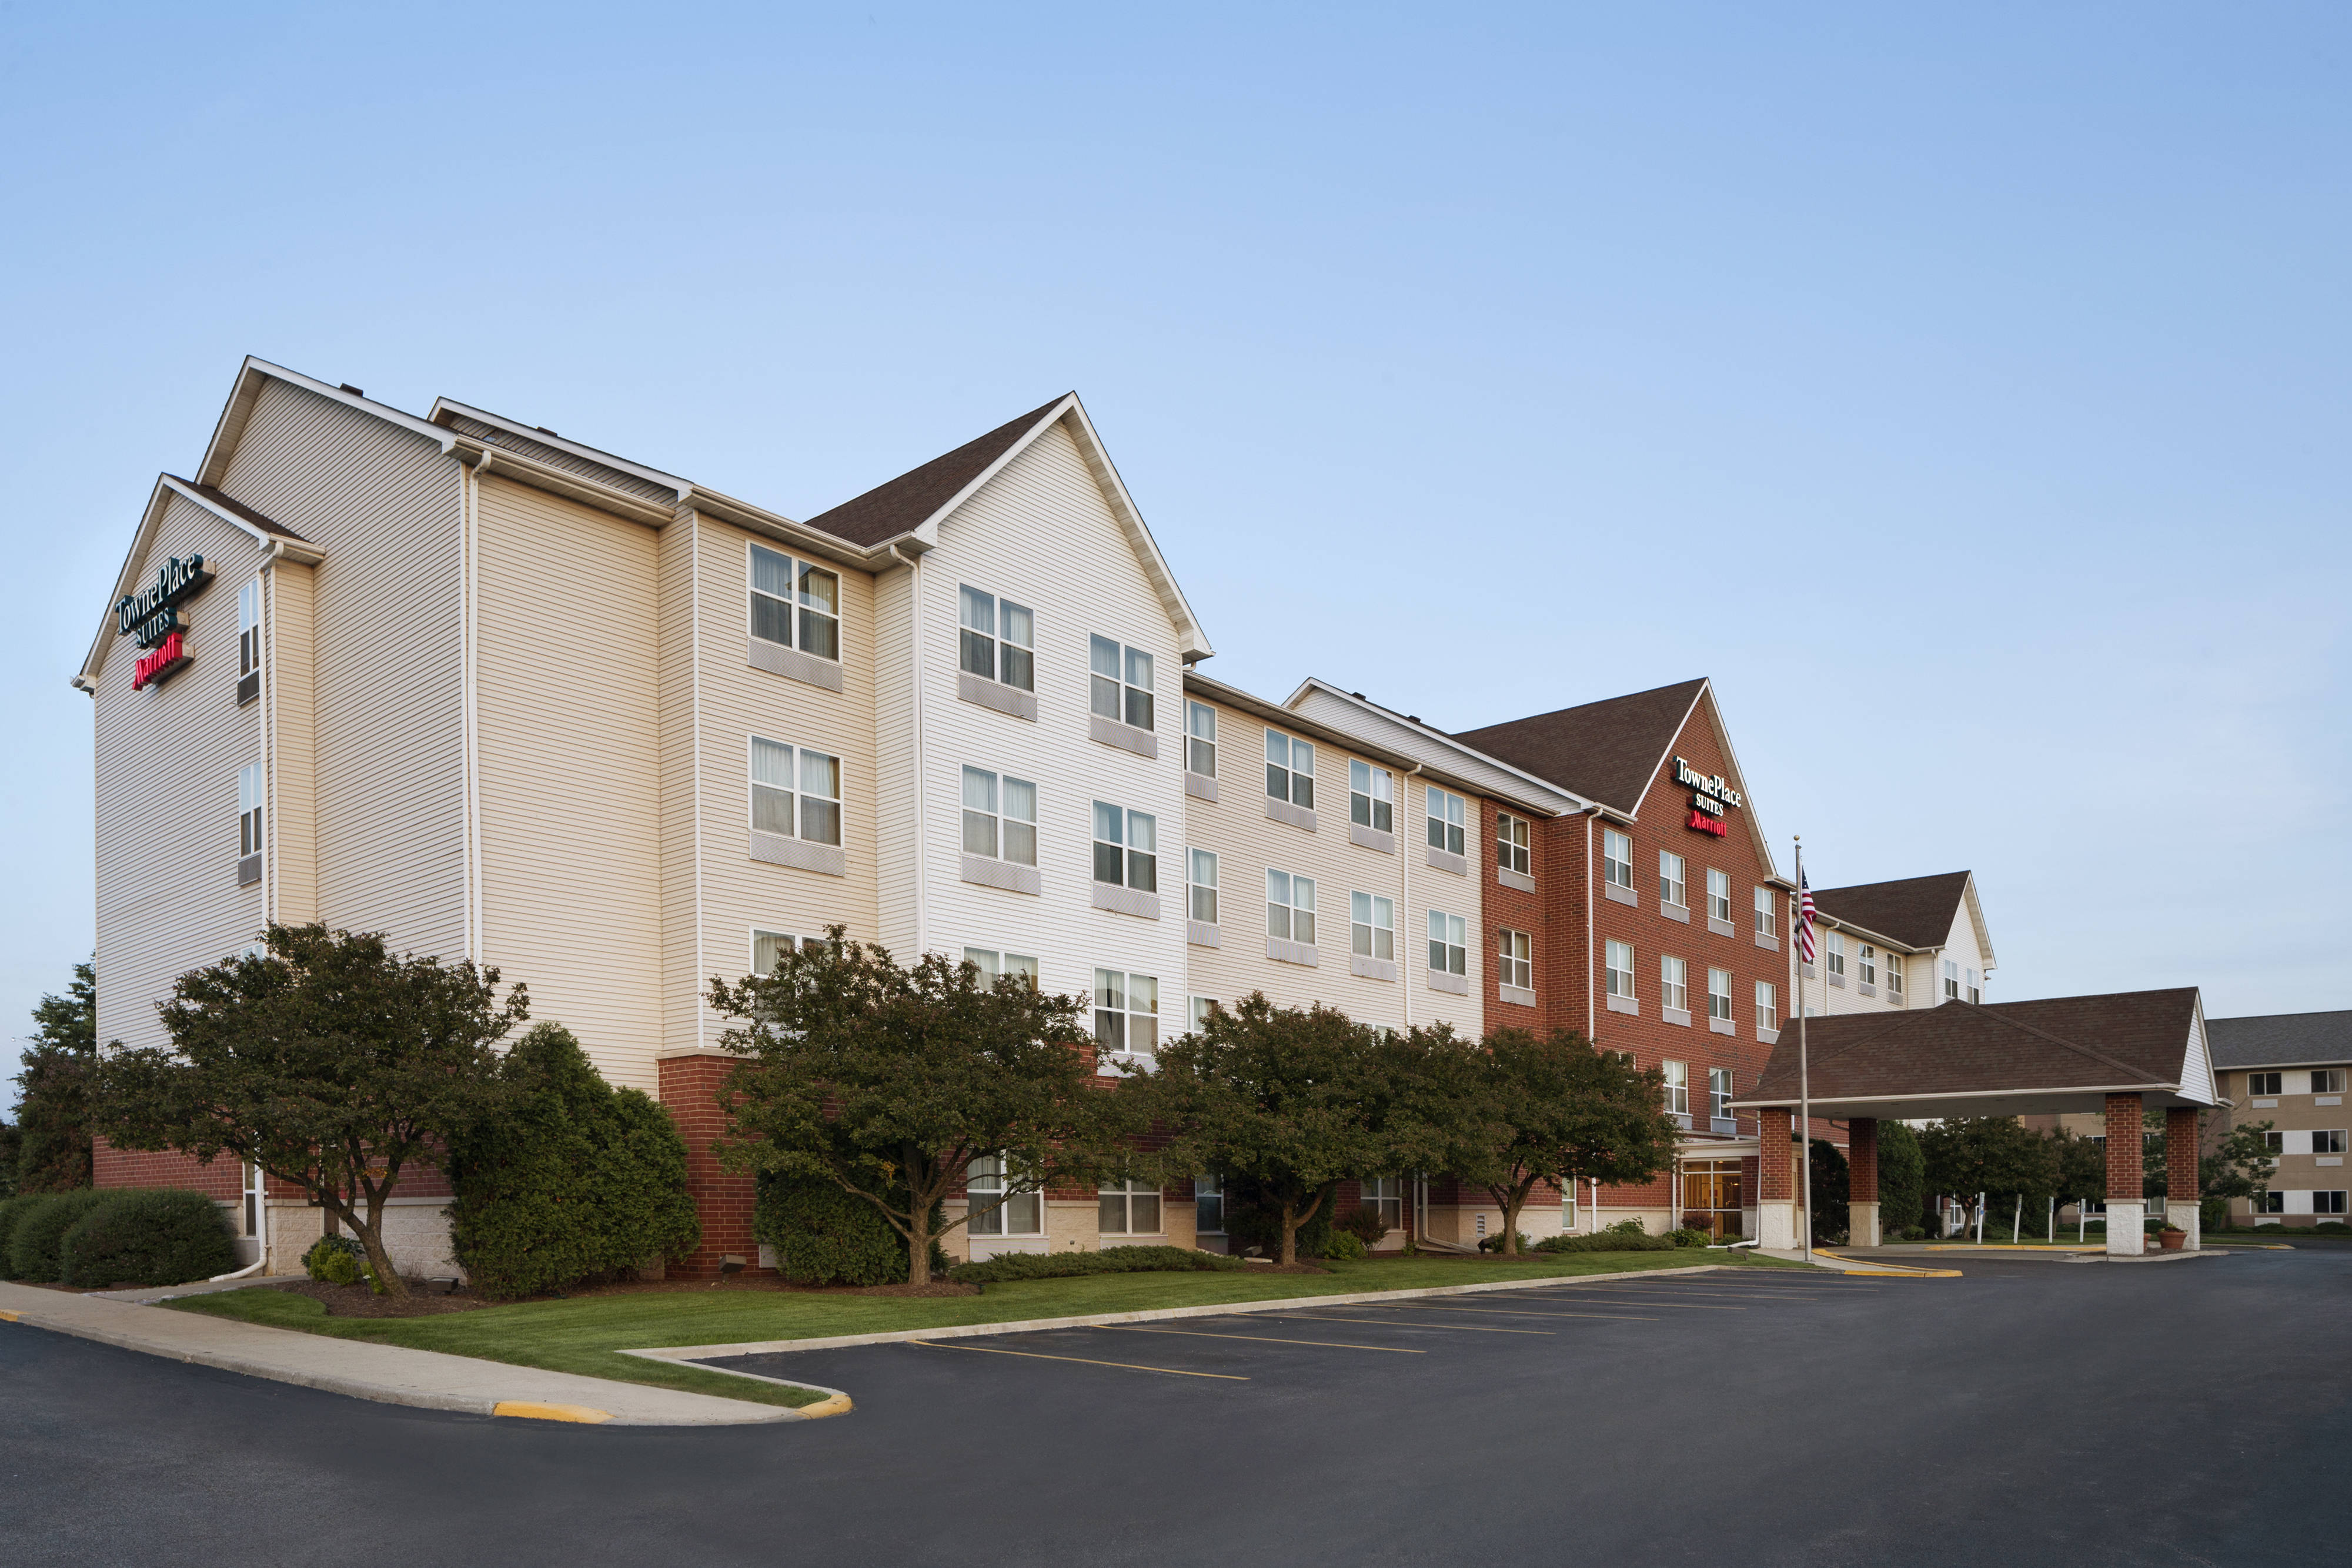 Photo of TownePlace Suites by Marriott Chicago Naperville, Naperville, IL